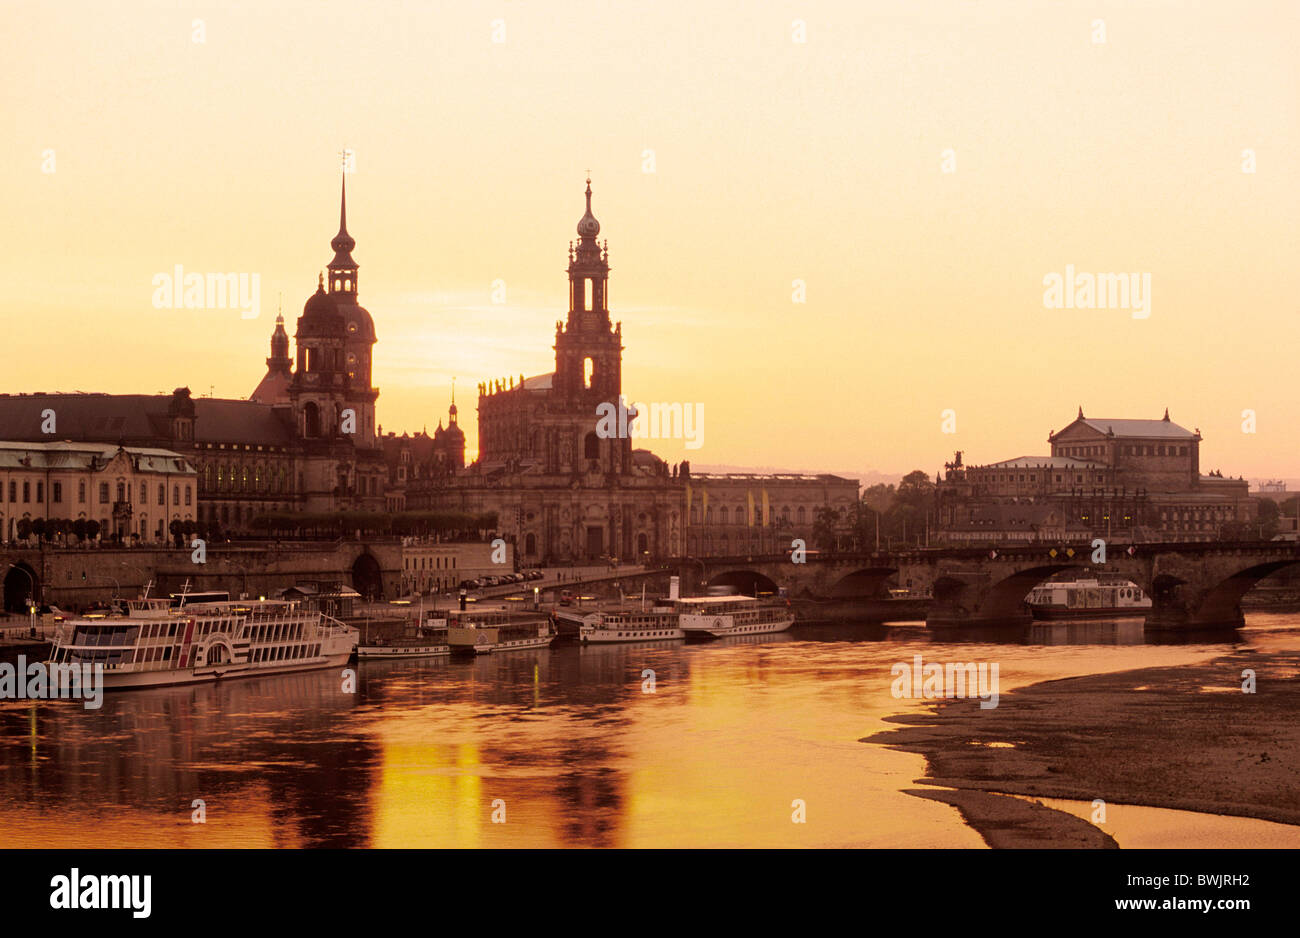 Europe, Germany, Saxony, Dresden, Skyline of Dresden with Bruehlsche terrace, Residenzschloss, Staendehaus, Haussman Tower and C Stock Photo